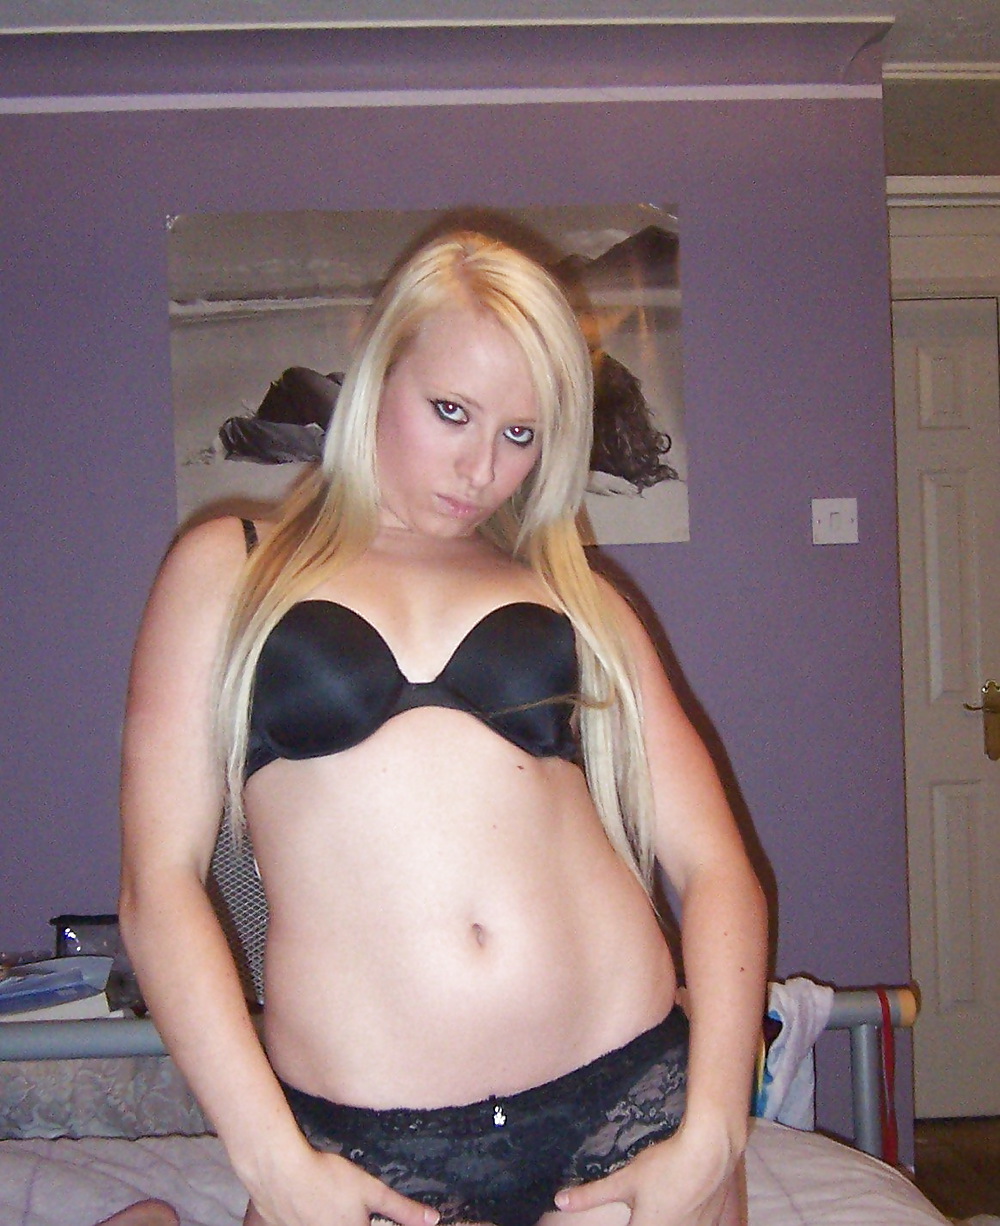 Stolen Pics - Blonde Girl with small Tits adult photos